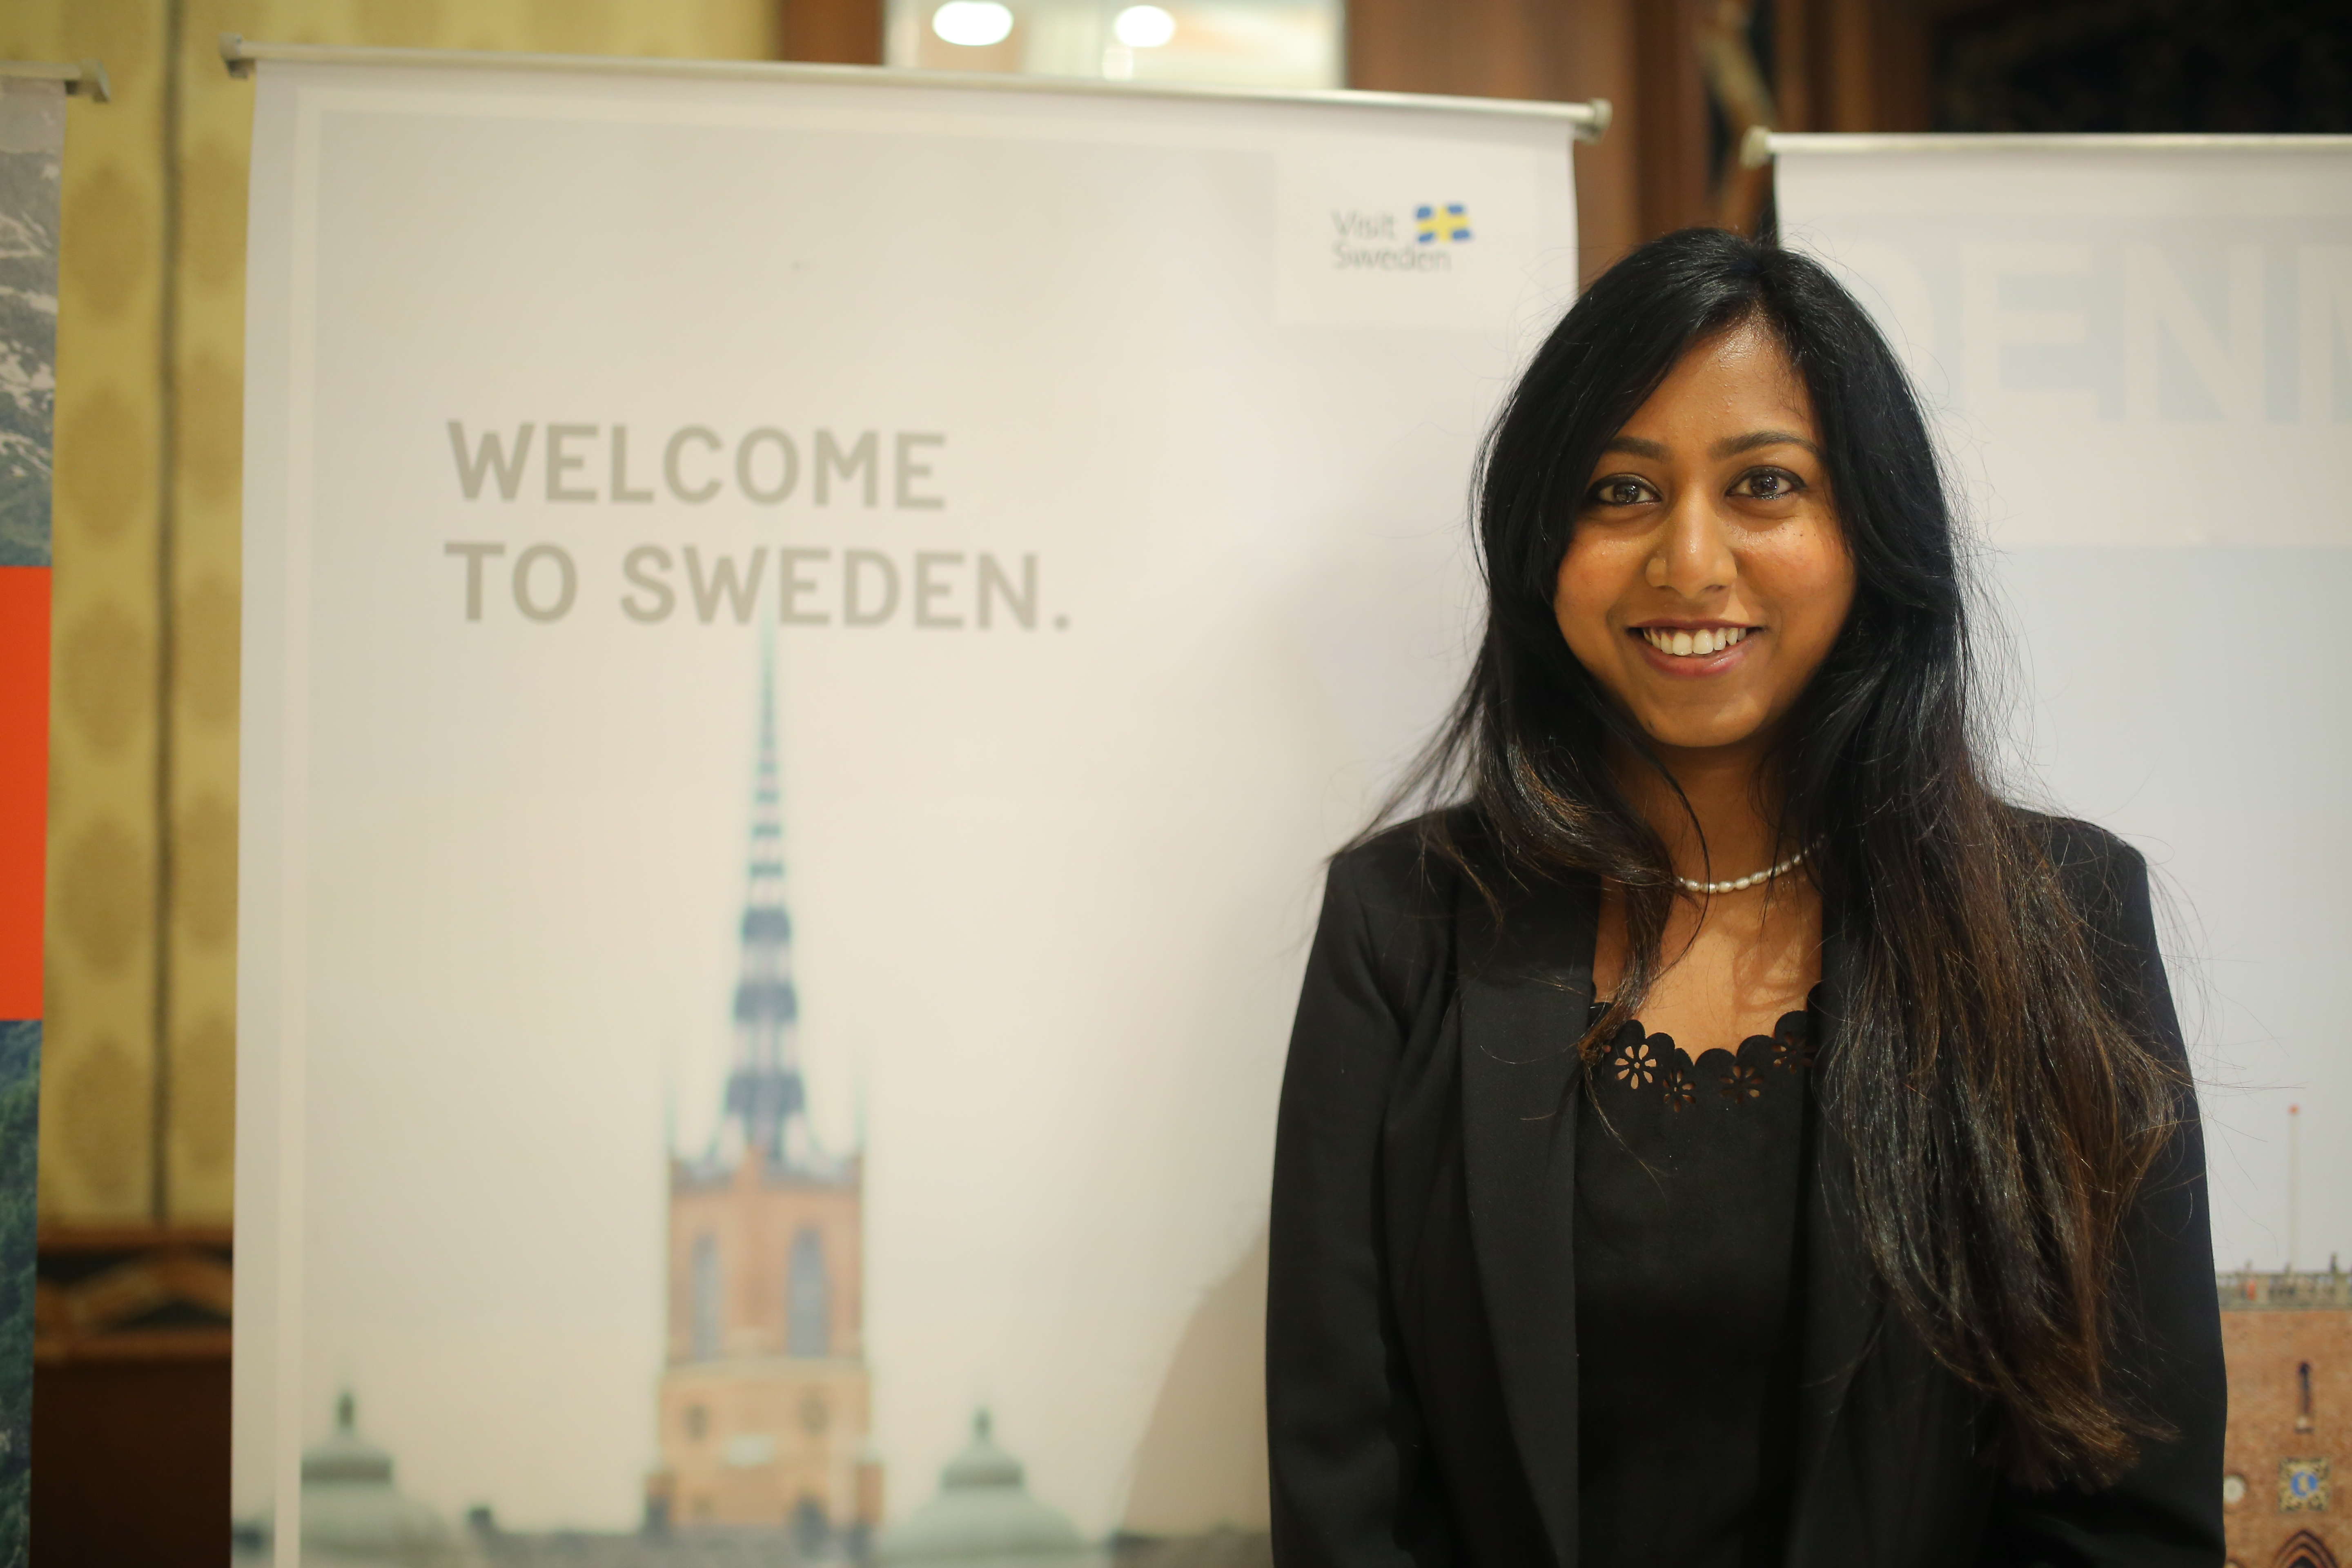 sustainable tourism sweden